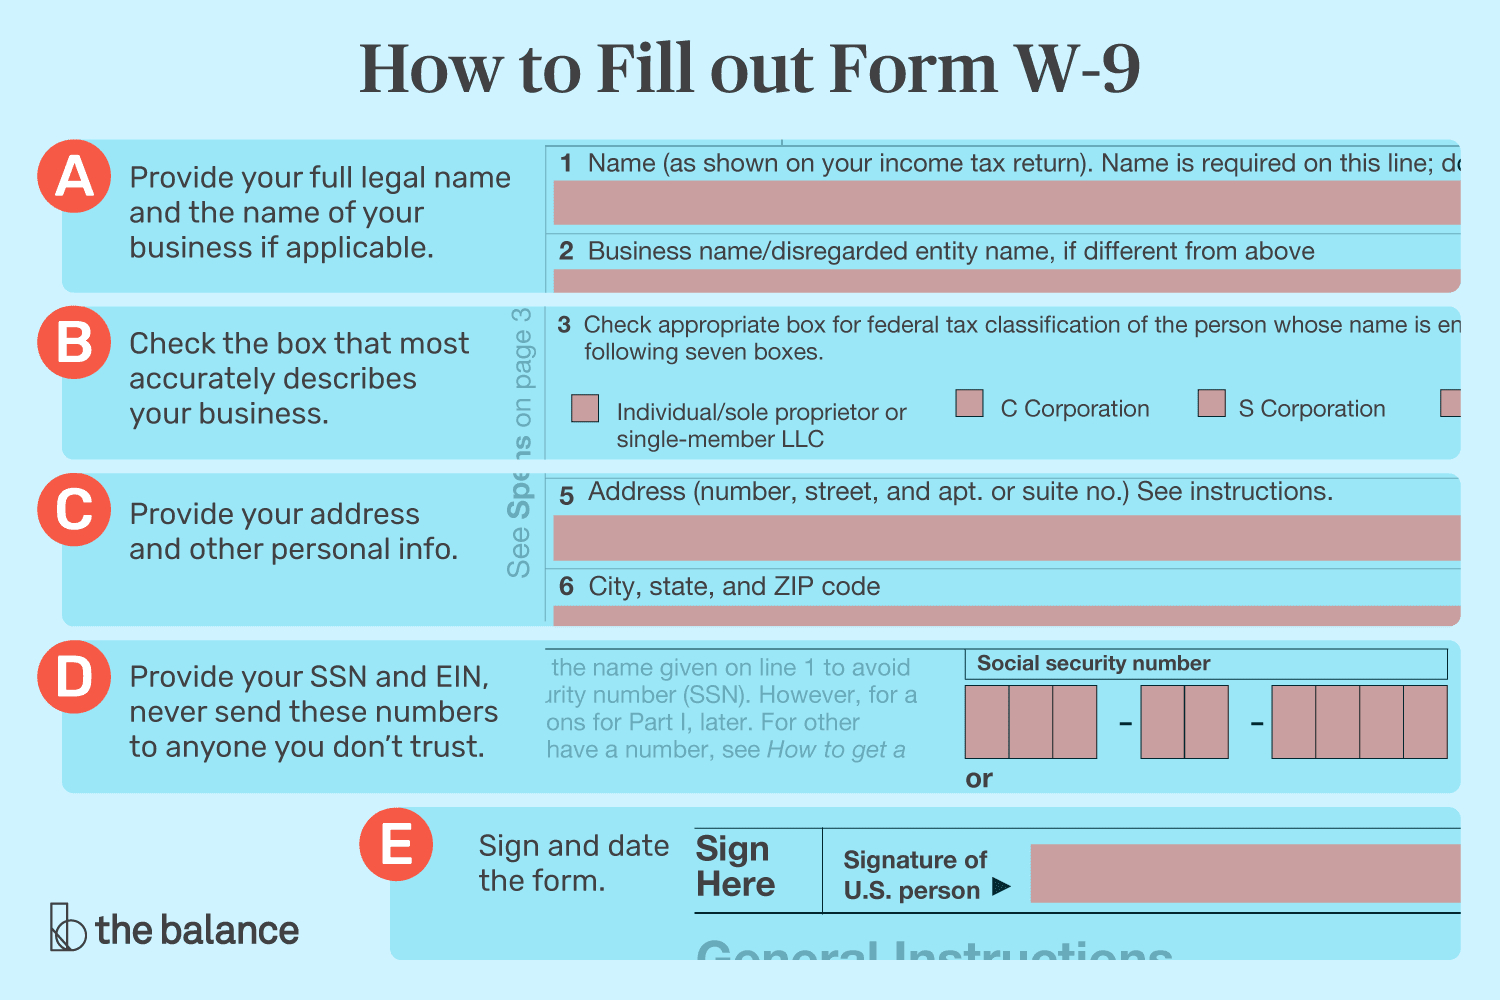 What Is Irs Form W-9 And How Should You Fill It Out?